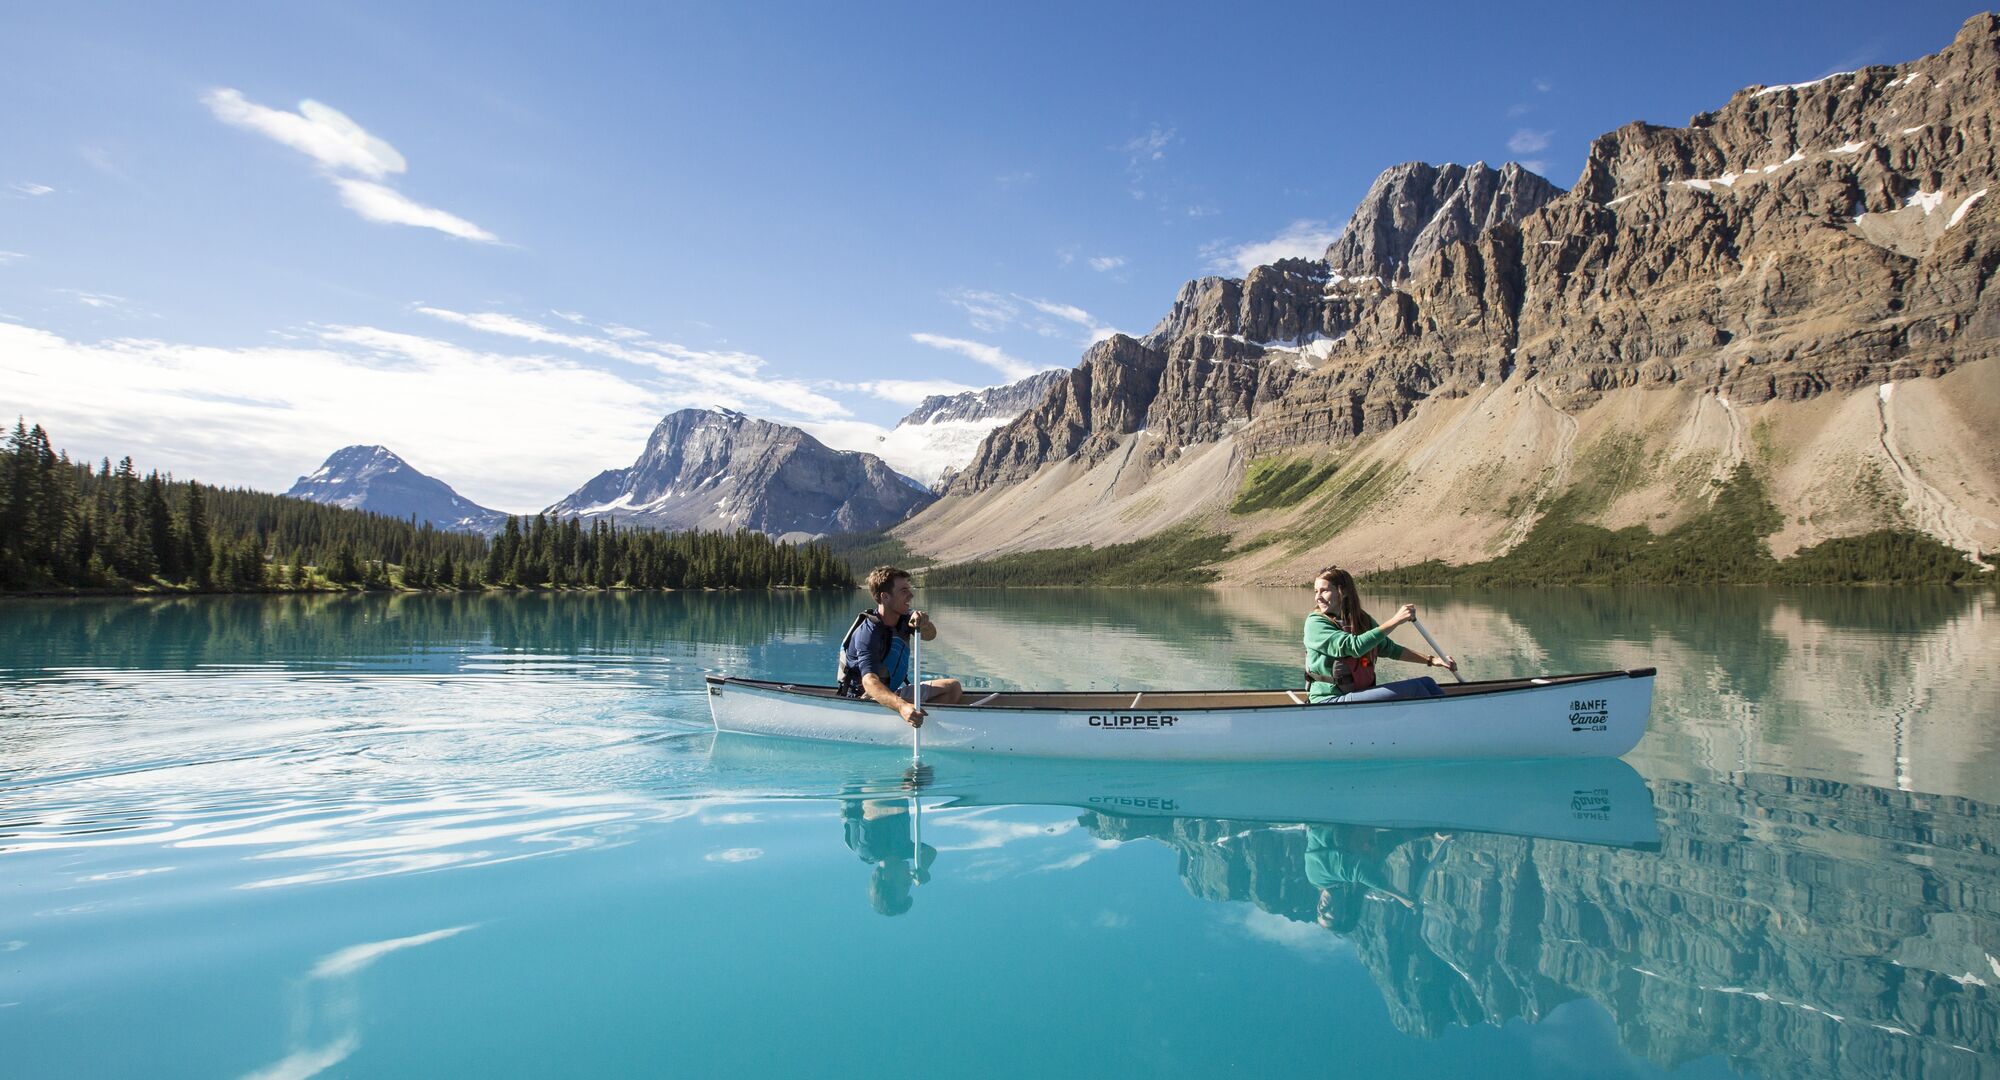 Two people canoeing on the turquoise waters of Bow Lake in Banff National Park